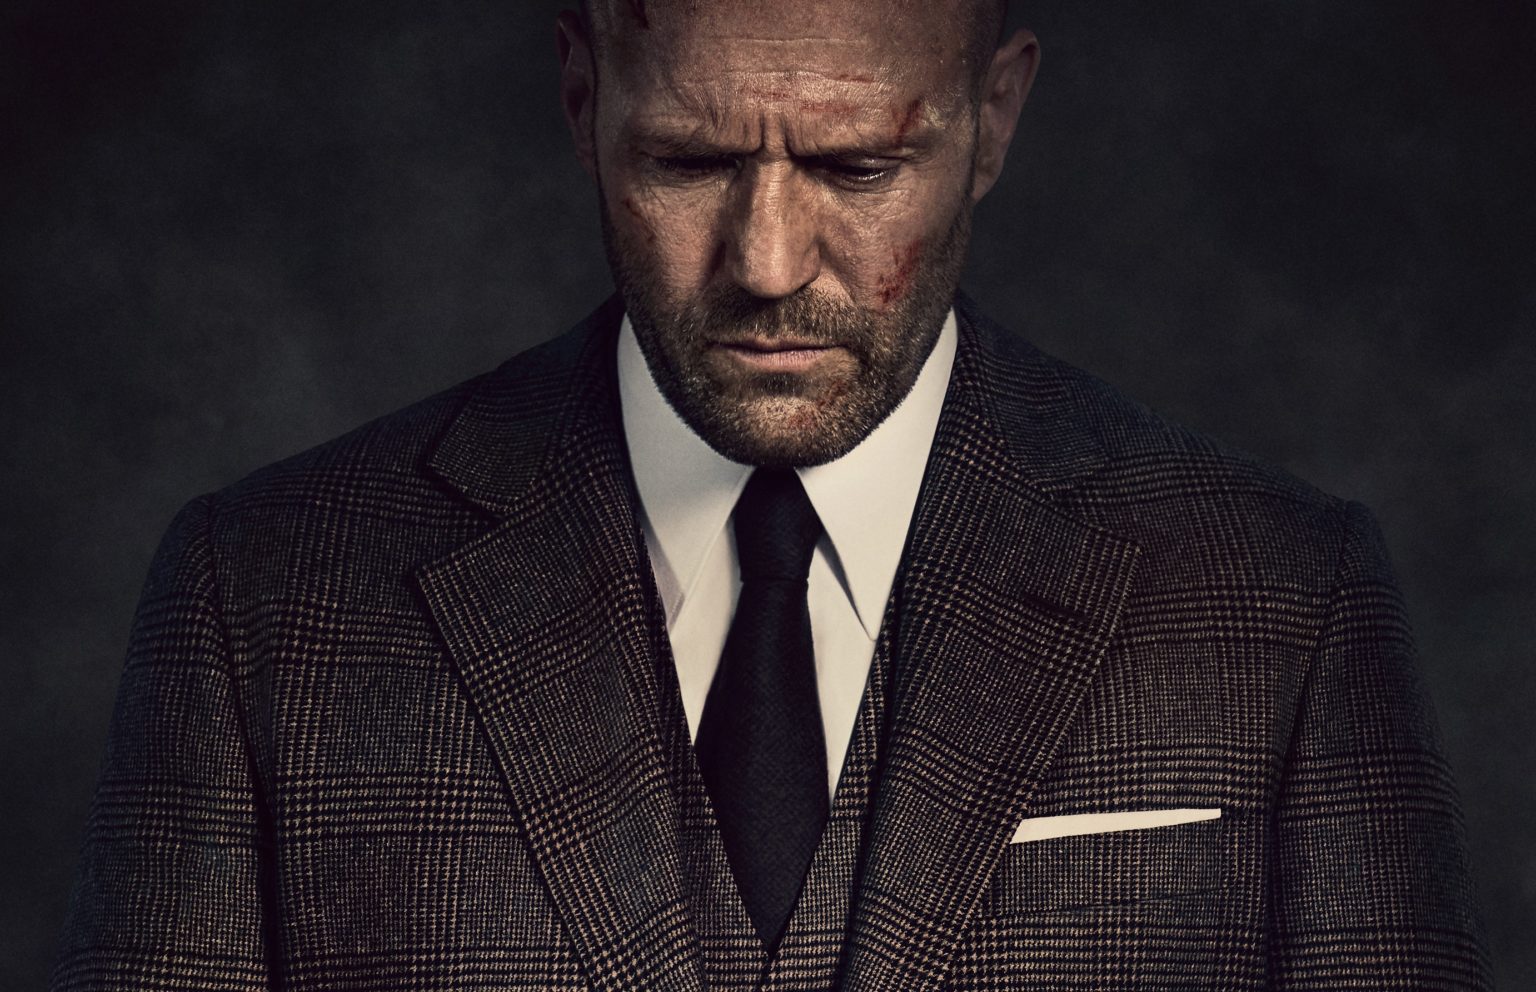 New Poster for Wrath of Man with Jason Statham LRM